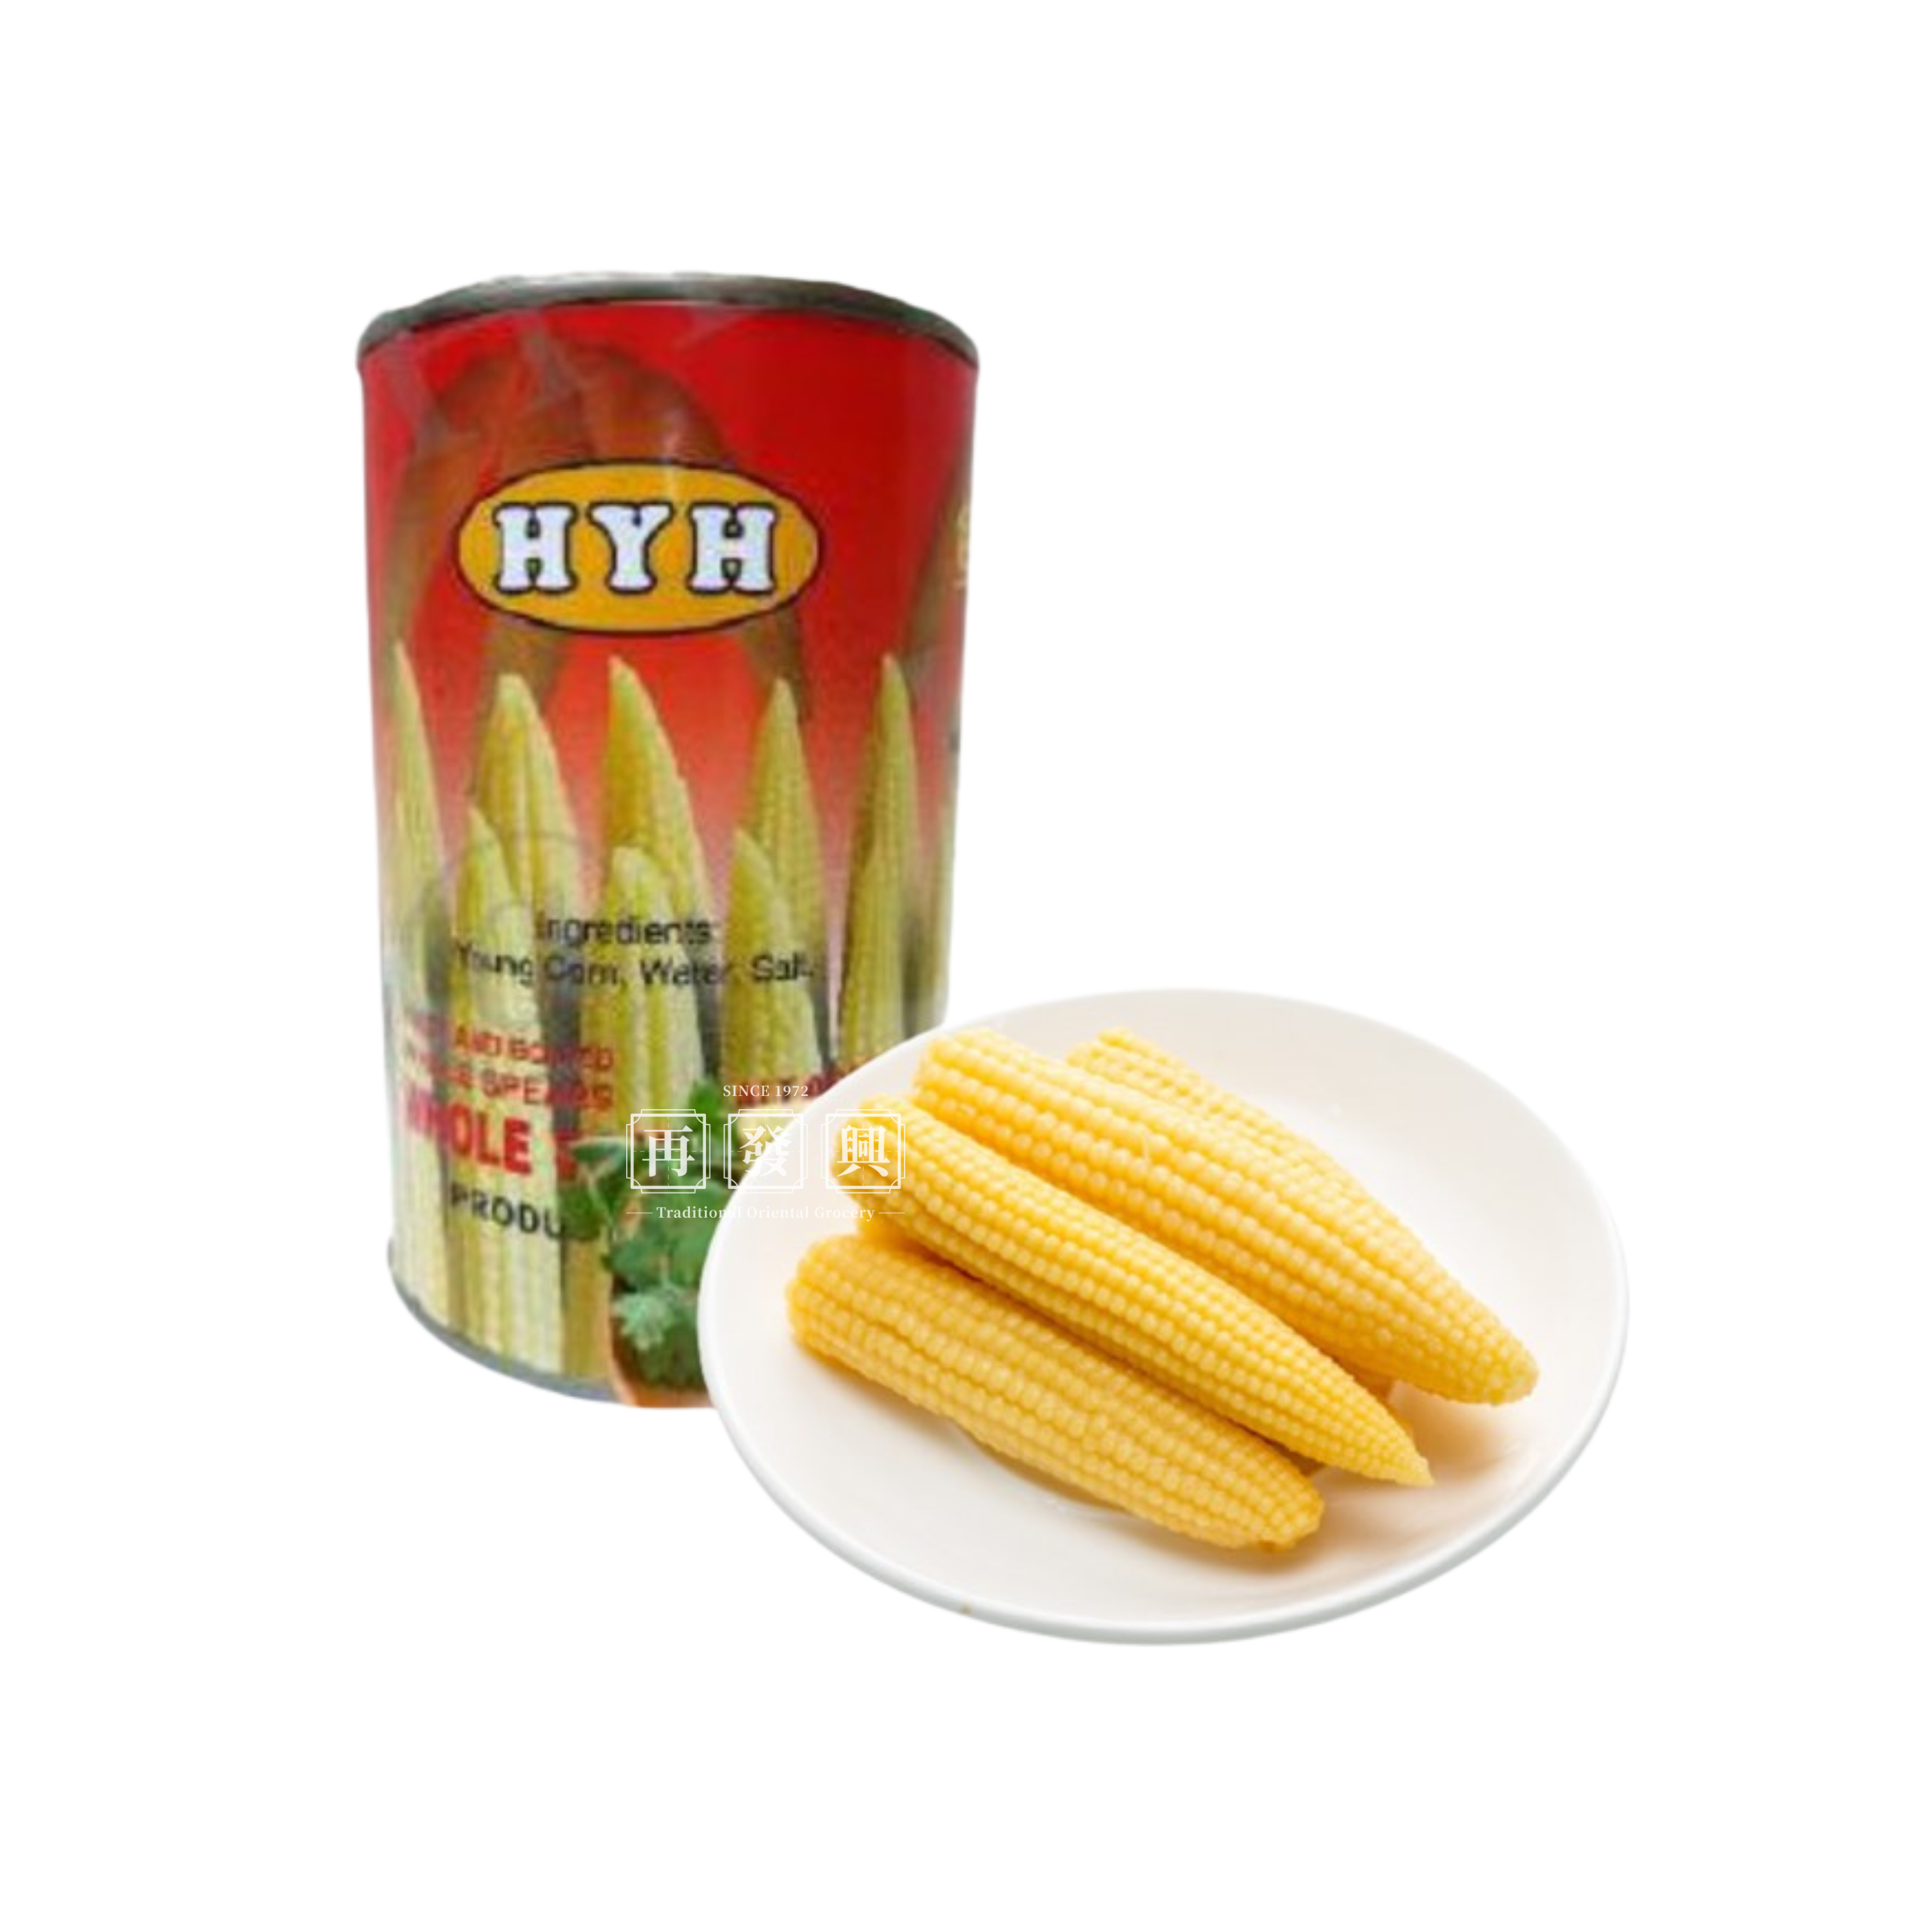 HYH Brand Whole Young Corn 425g